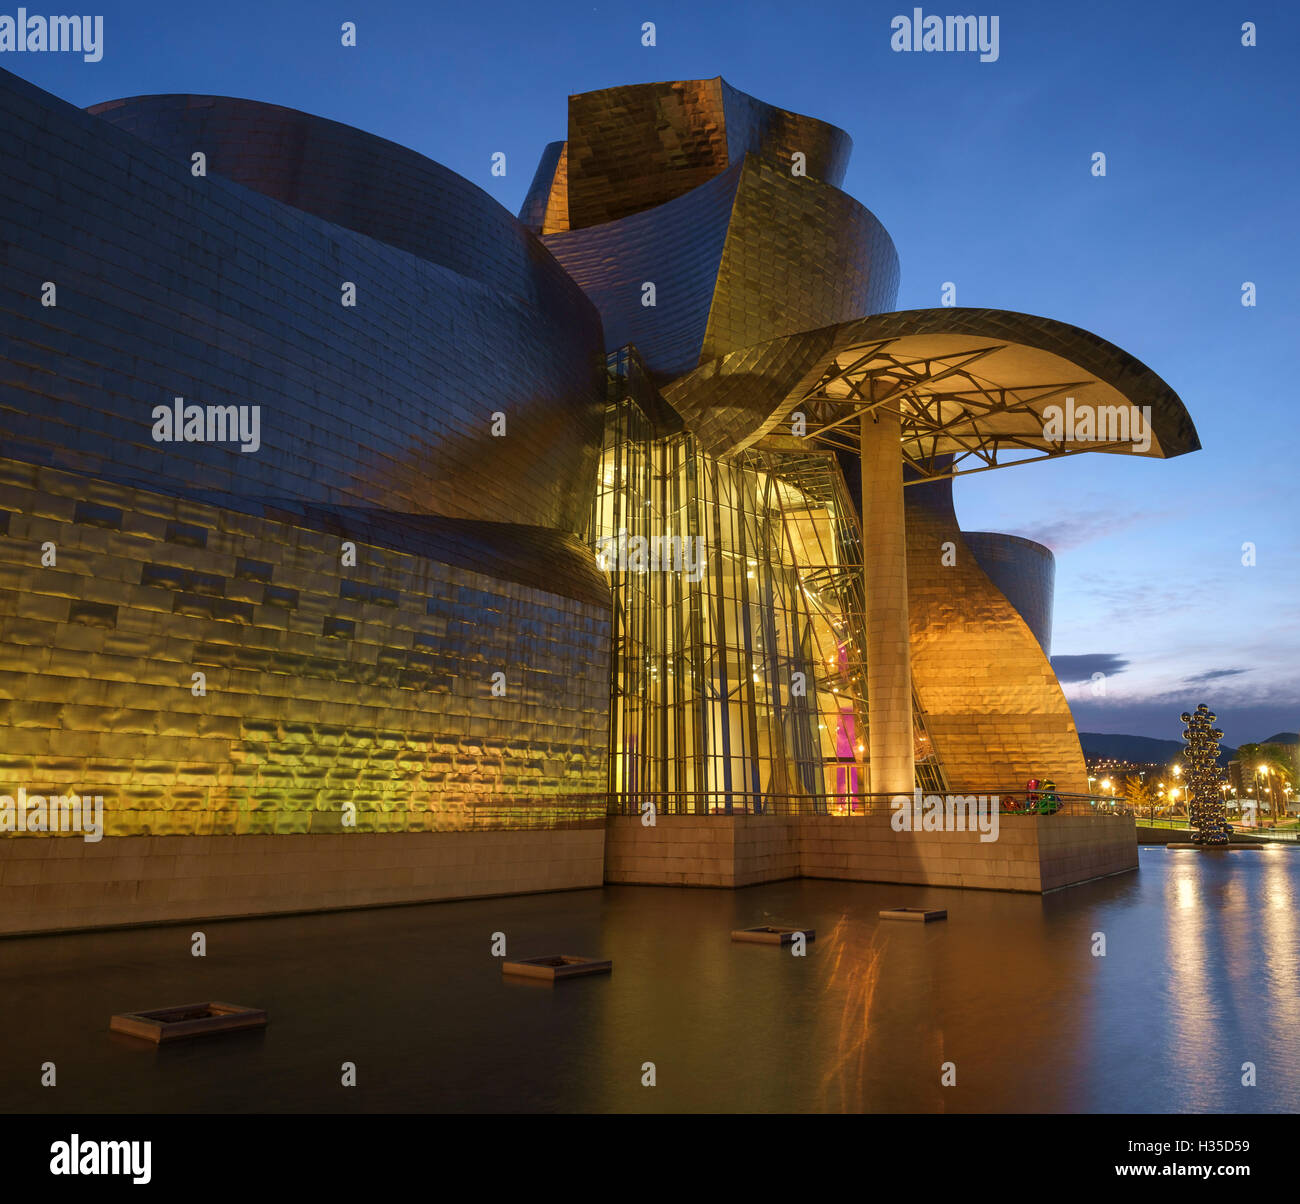 The Guggenheim Museum at night, Bilbao, Biscay, Basque Country, Spain, Europe Stock Photo